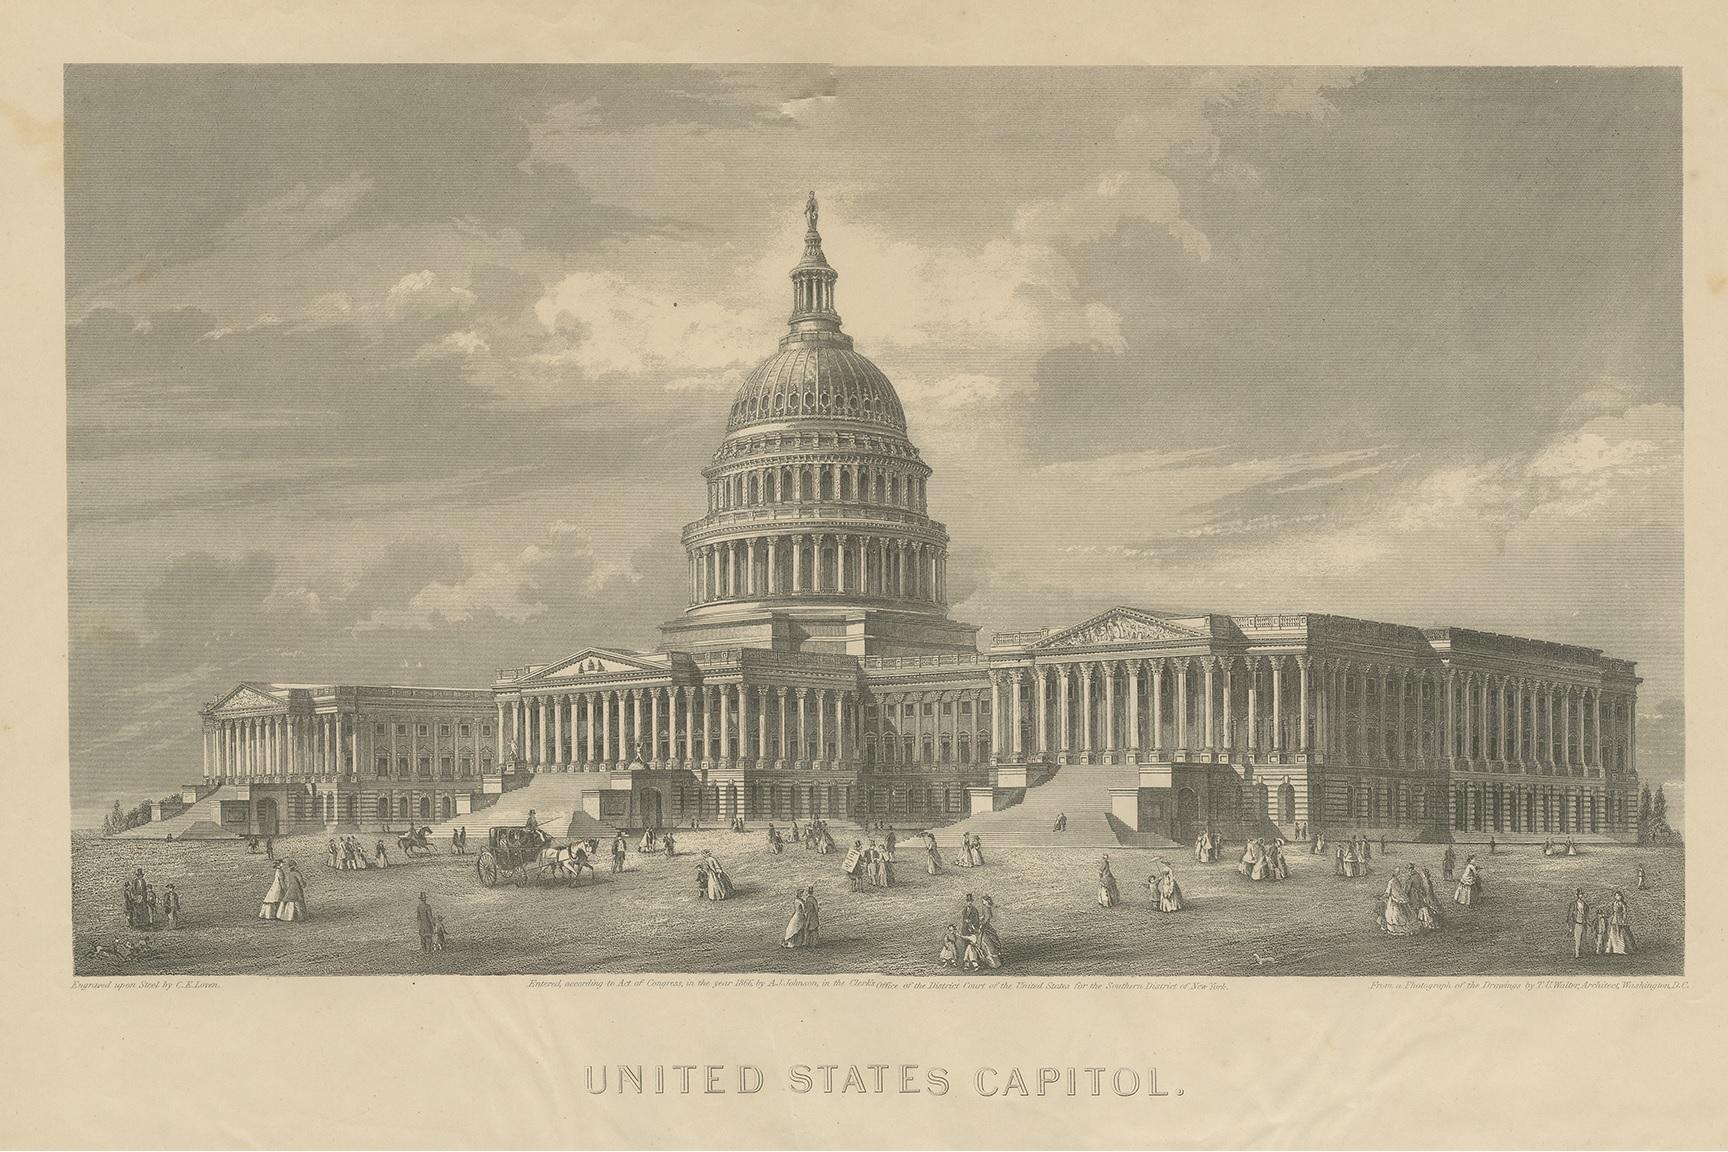 Antique print titled 'United States Capitol'. View of the United States Capitol, often called the Capitol Building. This print originates from 'Johnson's New Illustrated Family Atlas of the World' by A.J. Johnson. Published 1872.